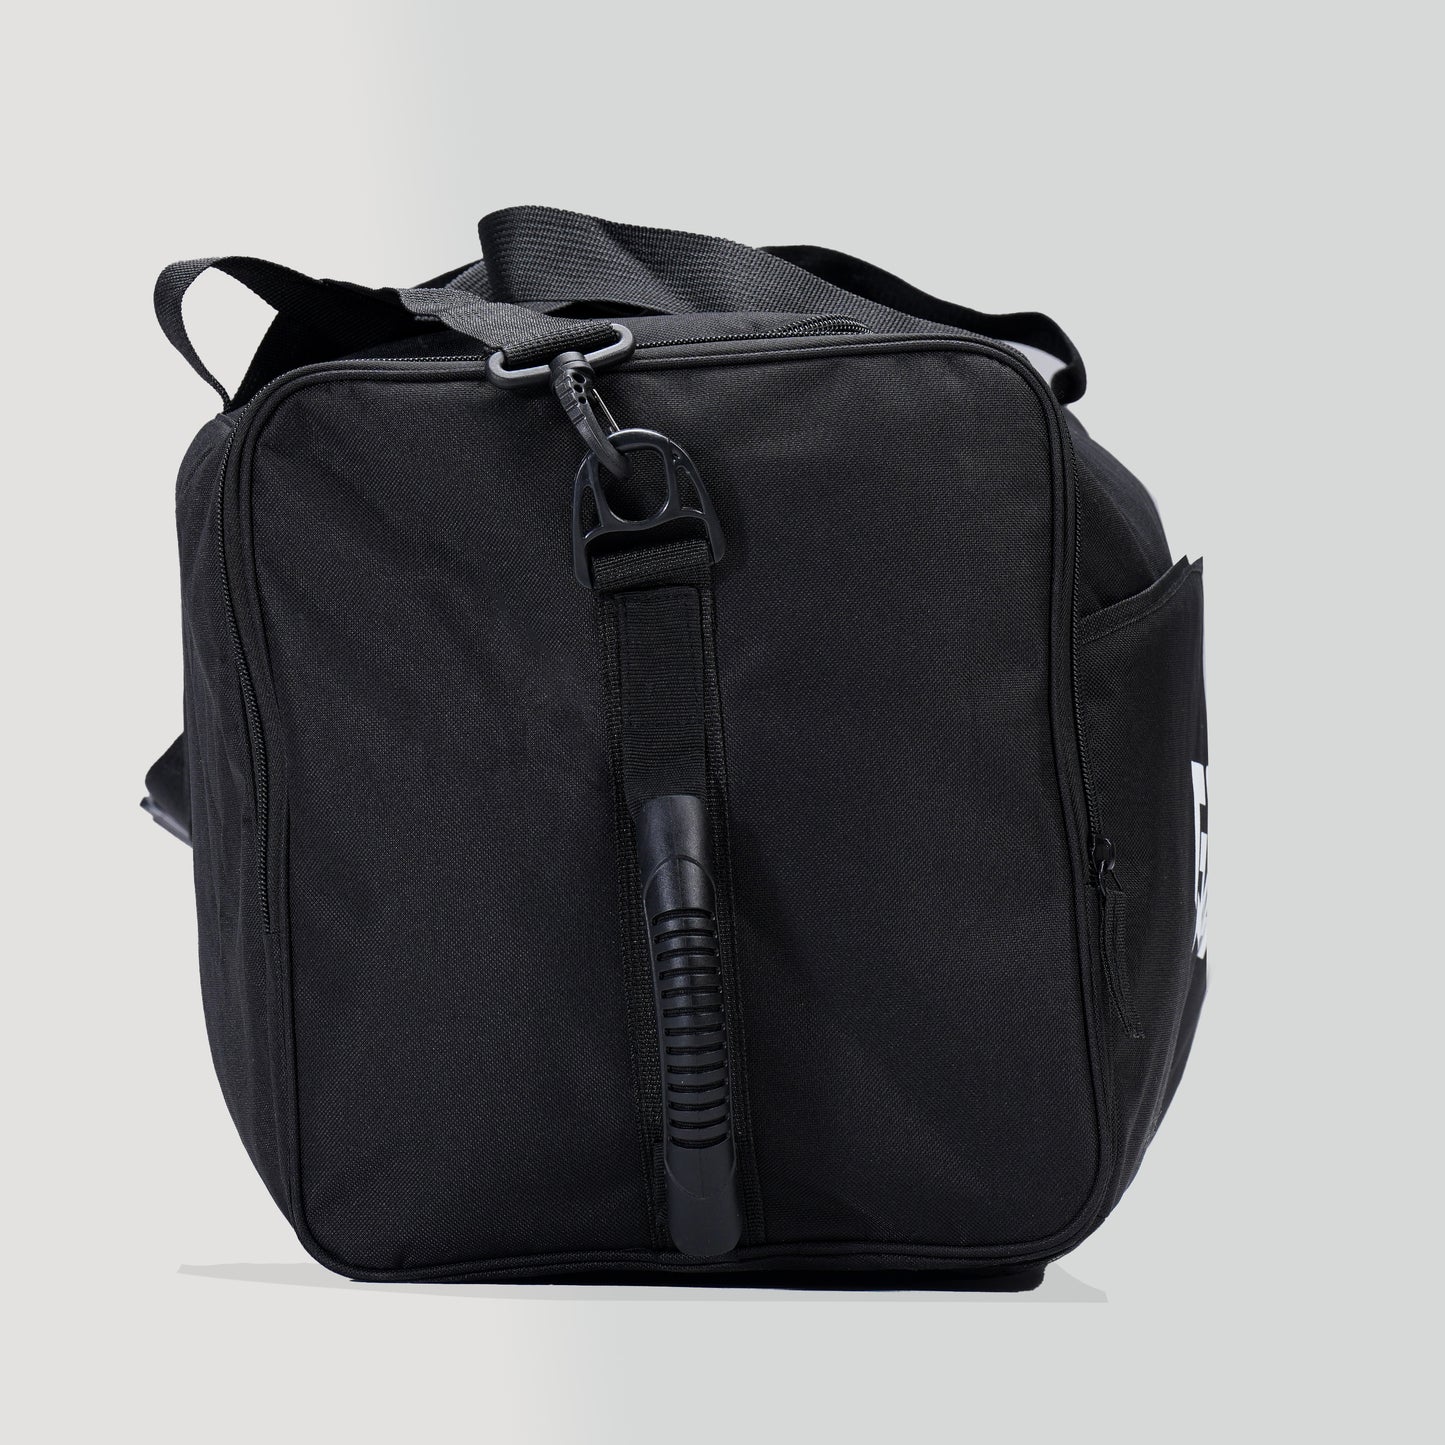 Max-Carry Gym Holdall (Black)